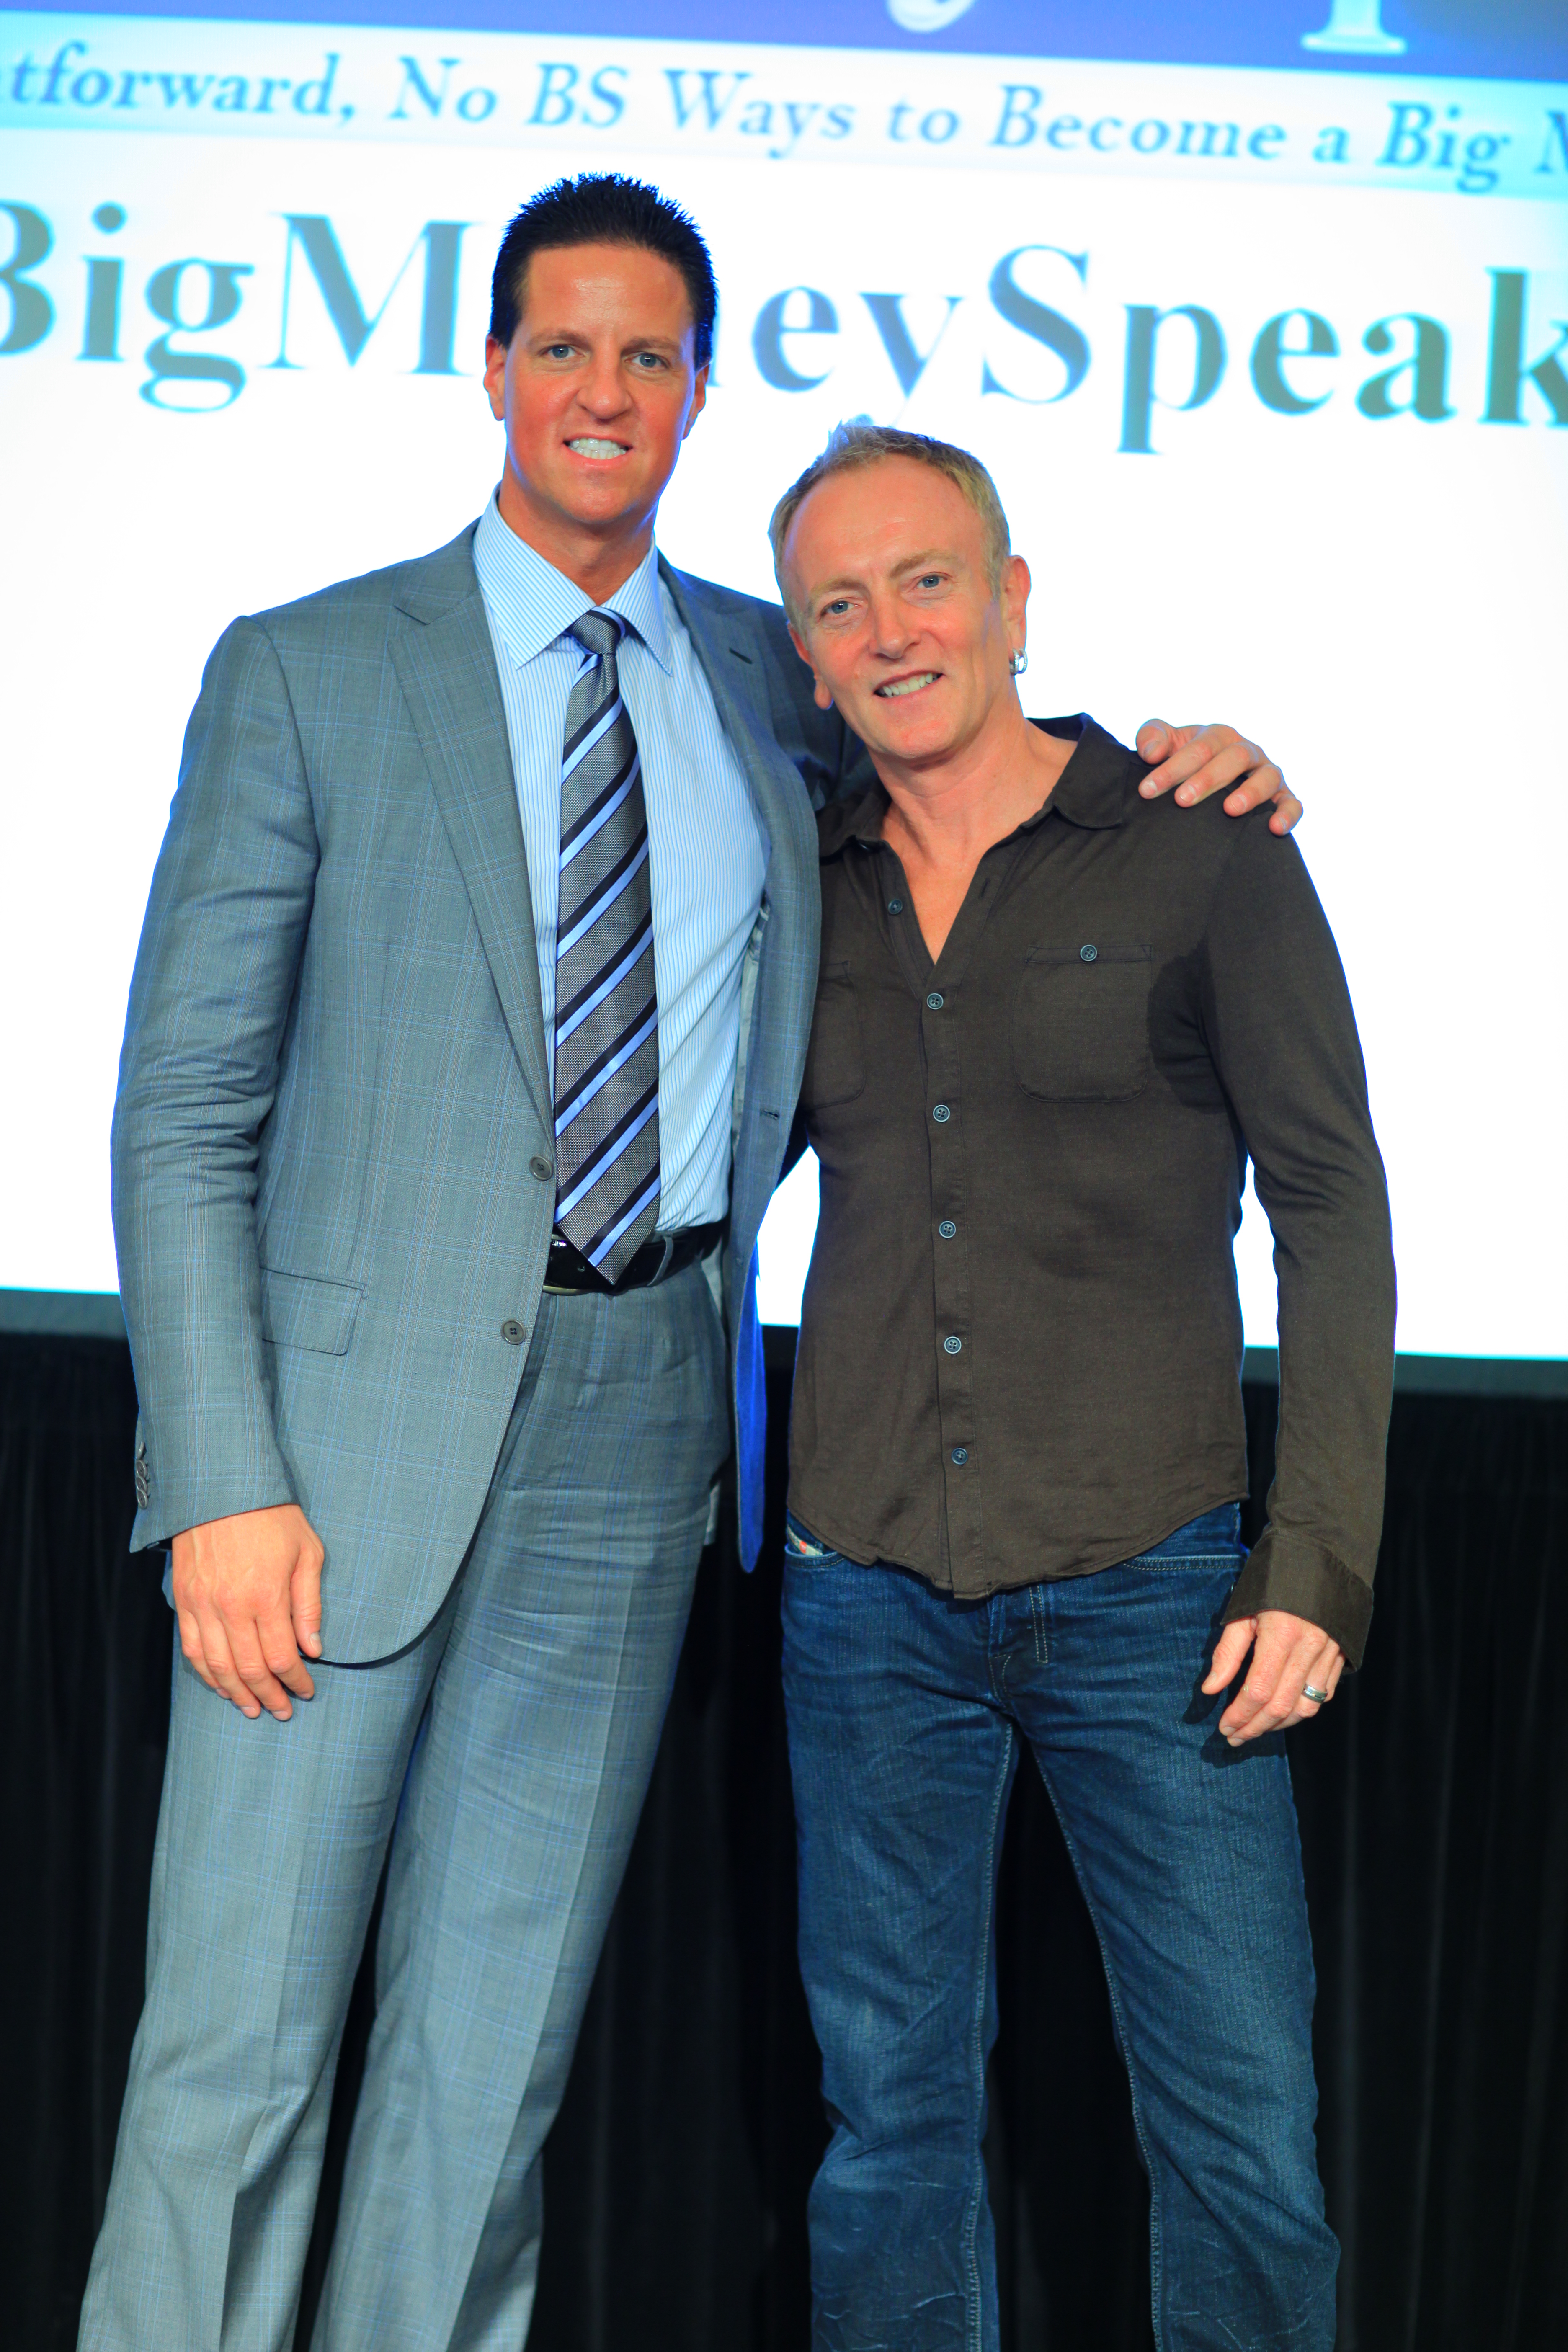 Phil Collen (Def Leppard Rock Band) at James Malinchak's Big Money Speaker Boot Camp. James Malinchak, Featured on ABC's Hit TV Show, Secret Millionaire, is one of America's highest-paid, most in-demand motivational & business speakers